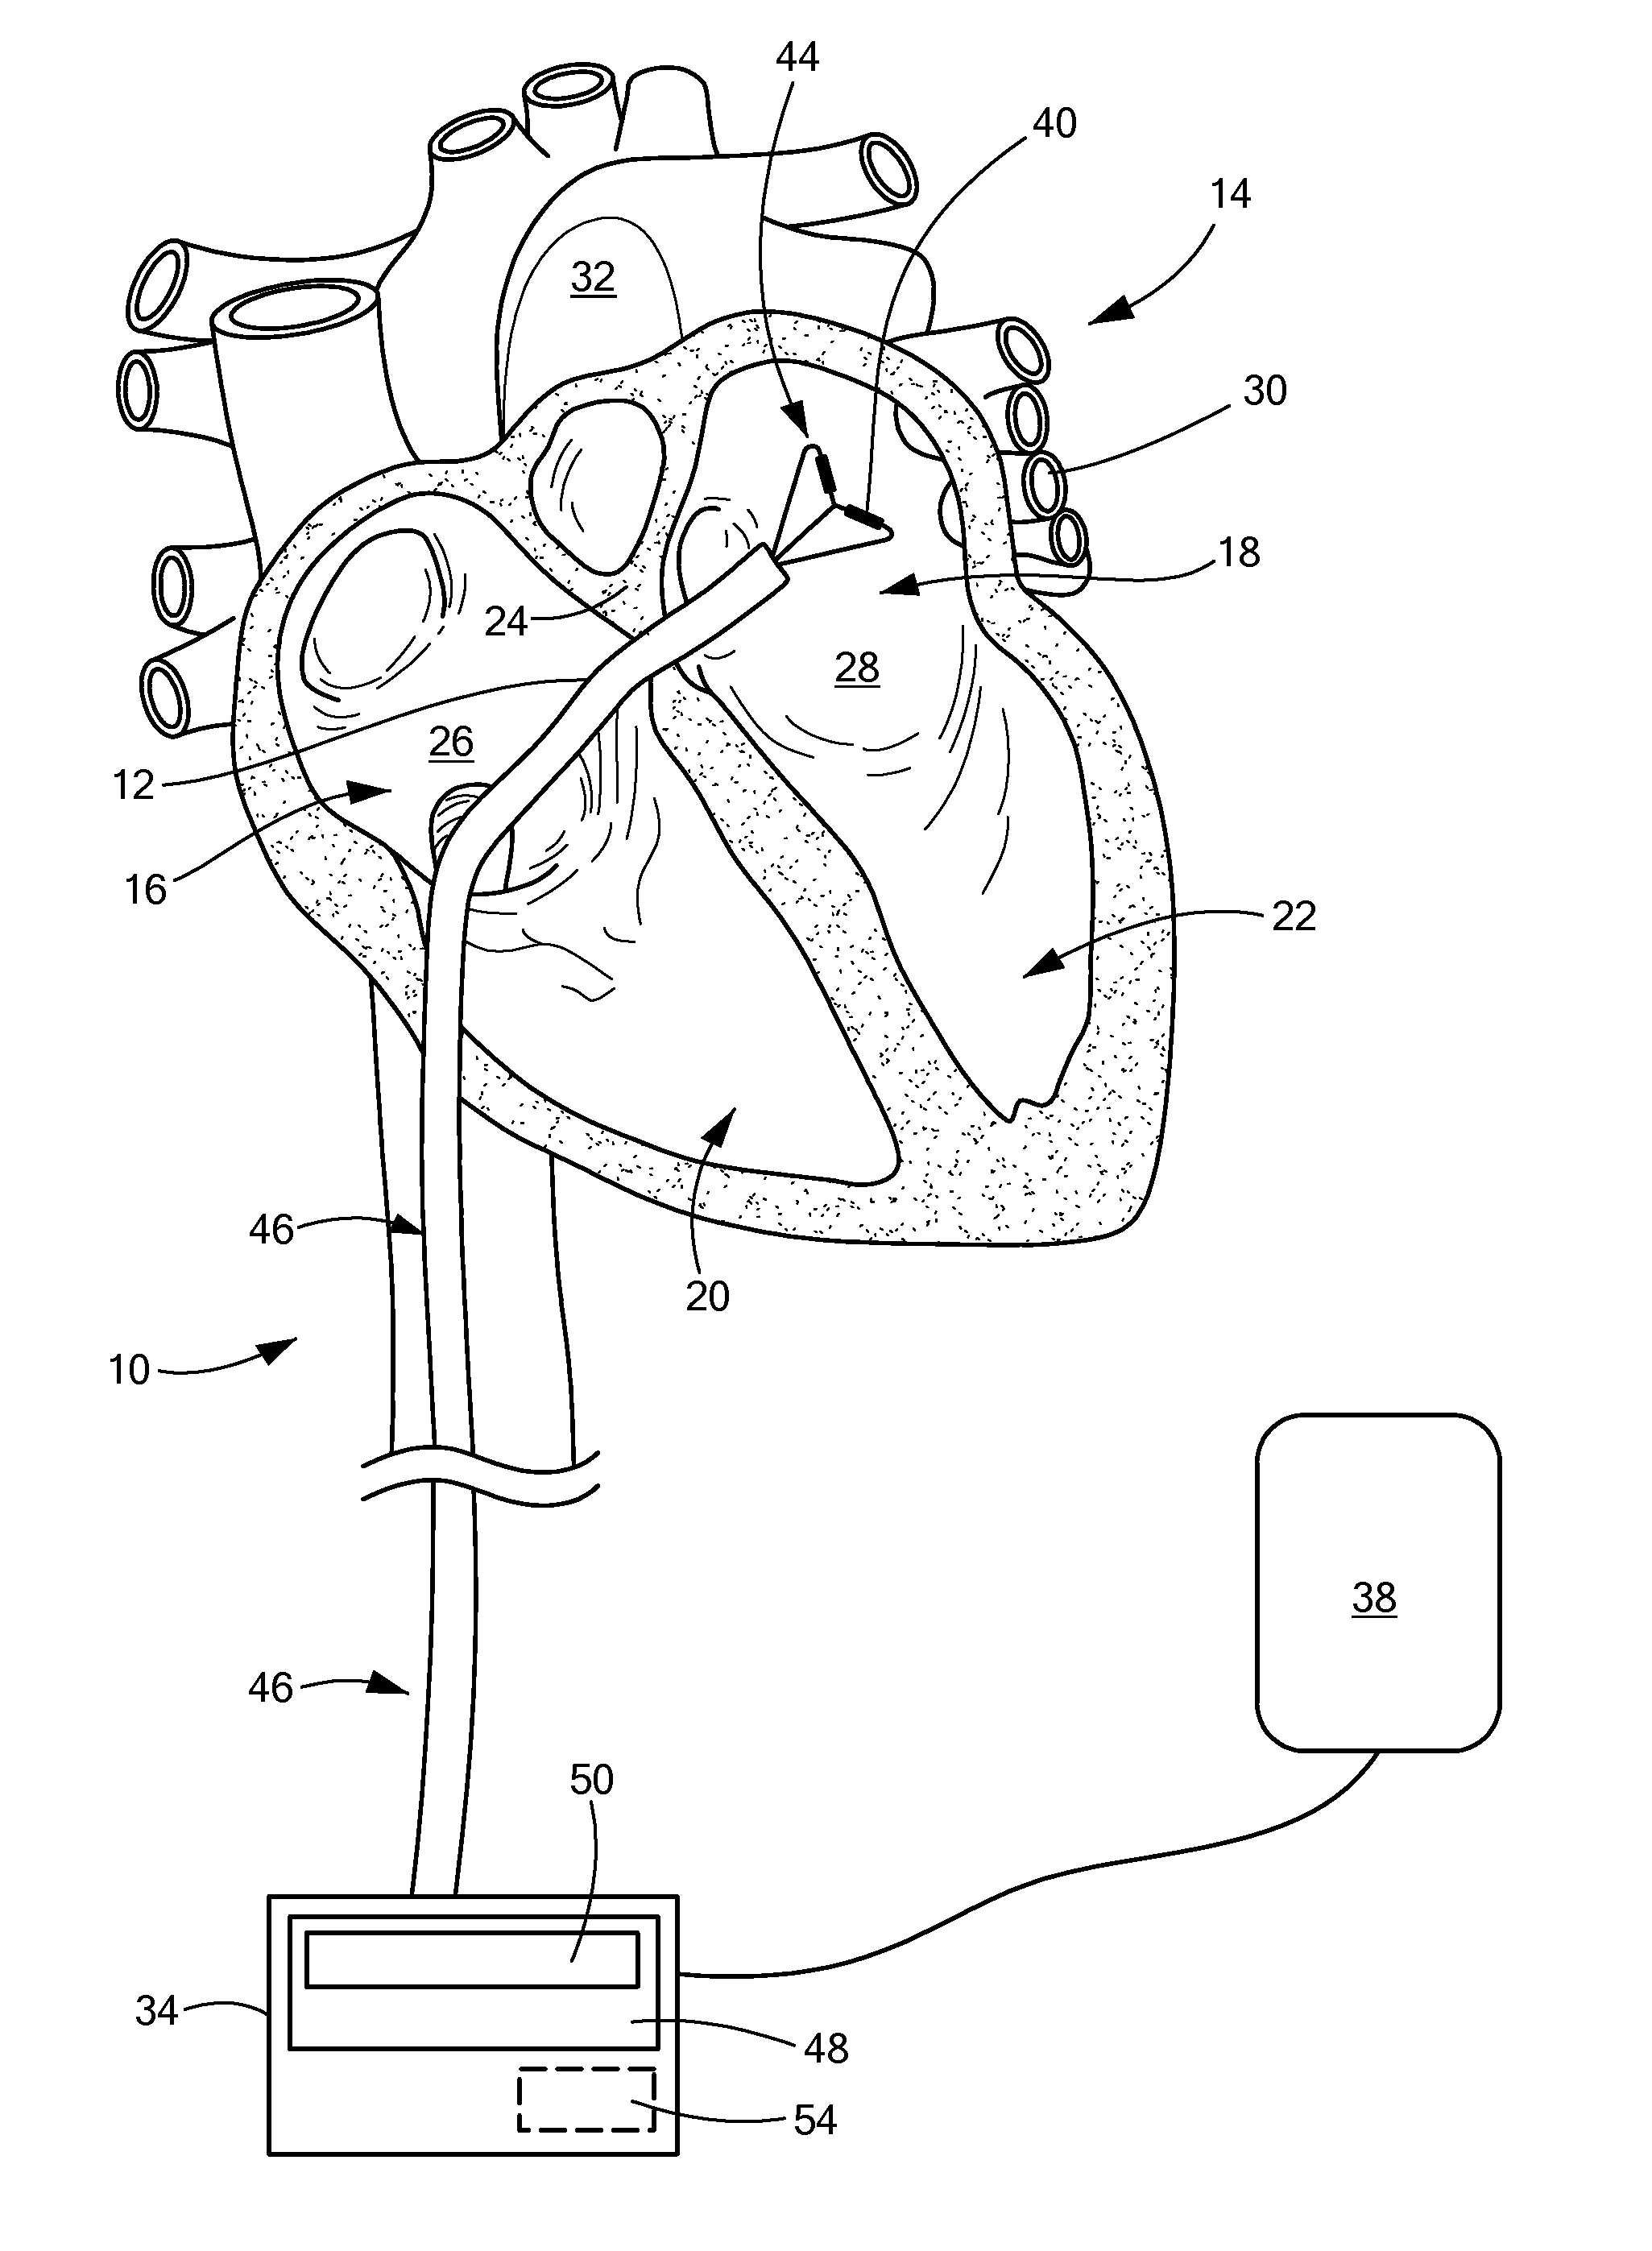 Controlled RF energy in a multi-electrode catheter